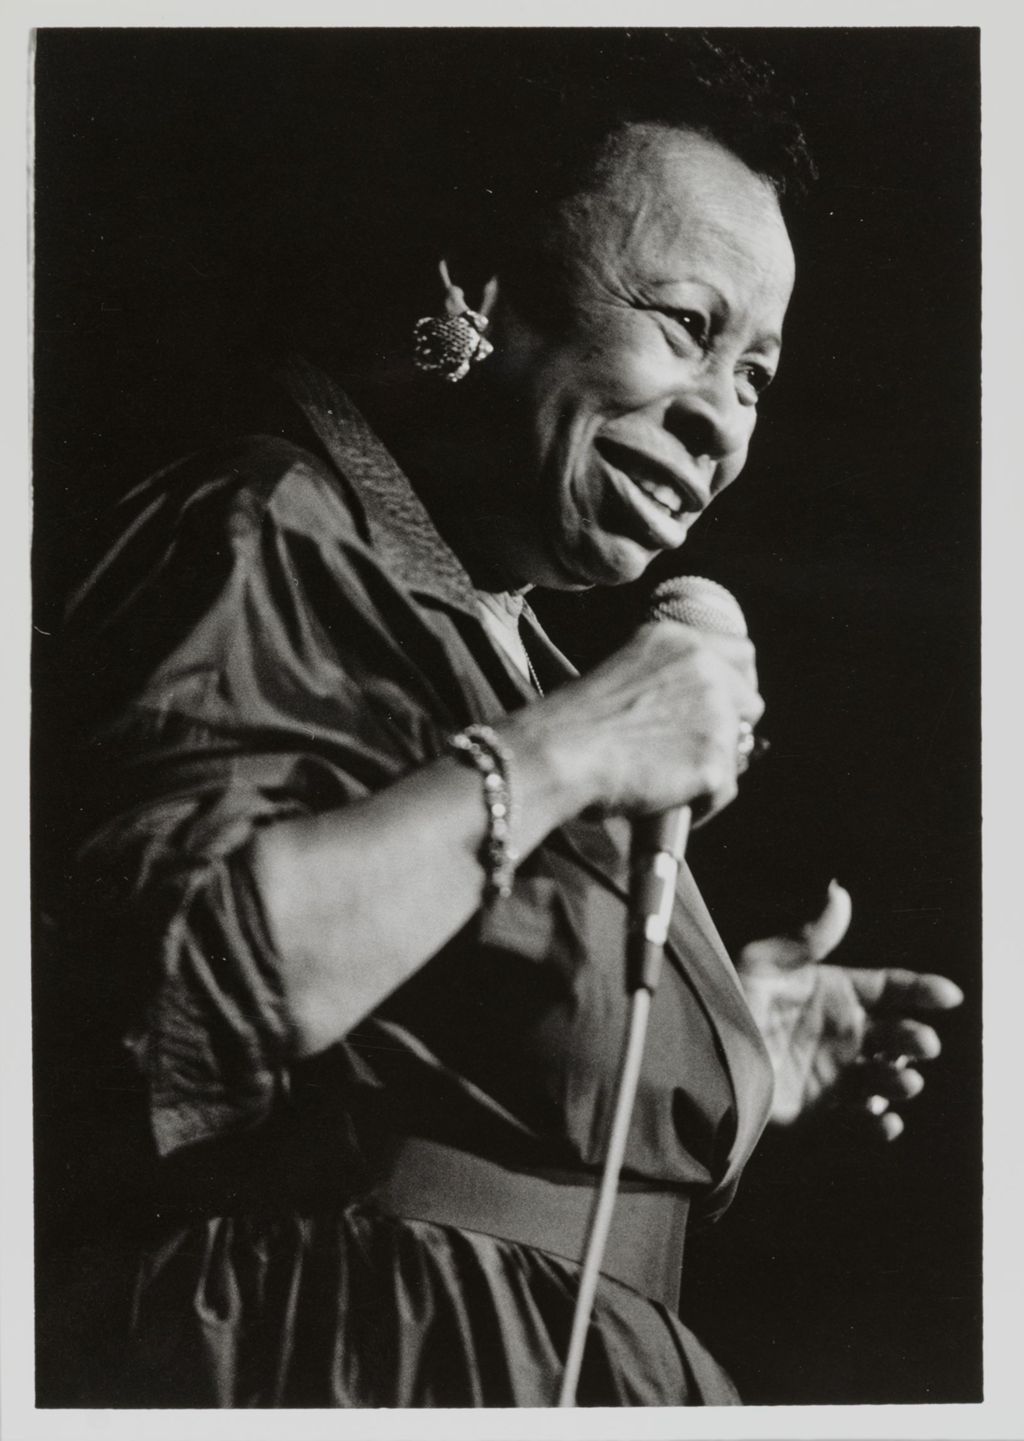 Miniature of Betty Carter at the 11th Annual Jazz Fest